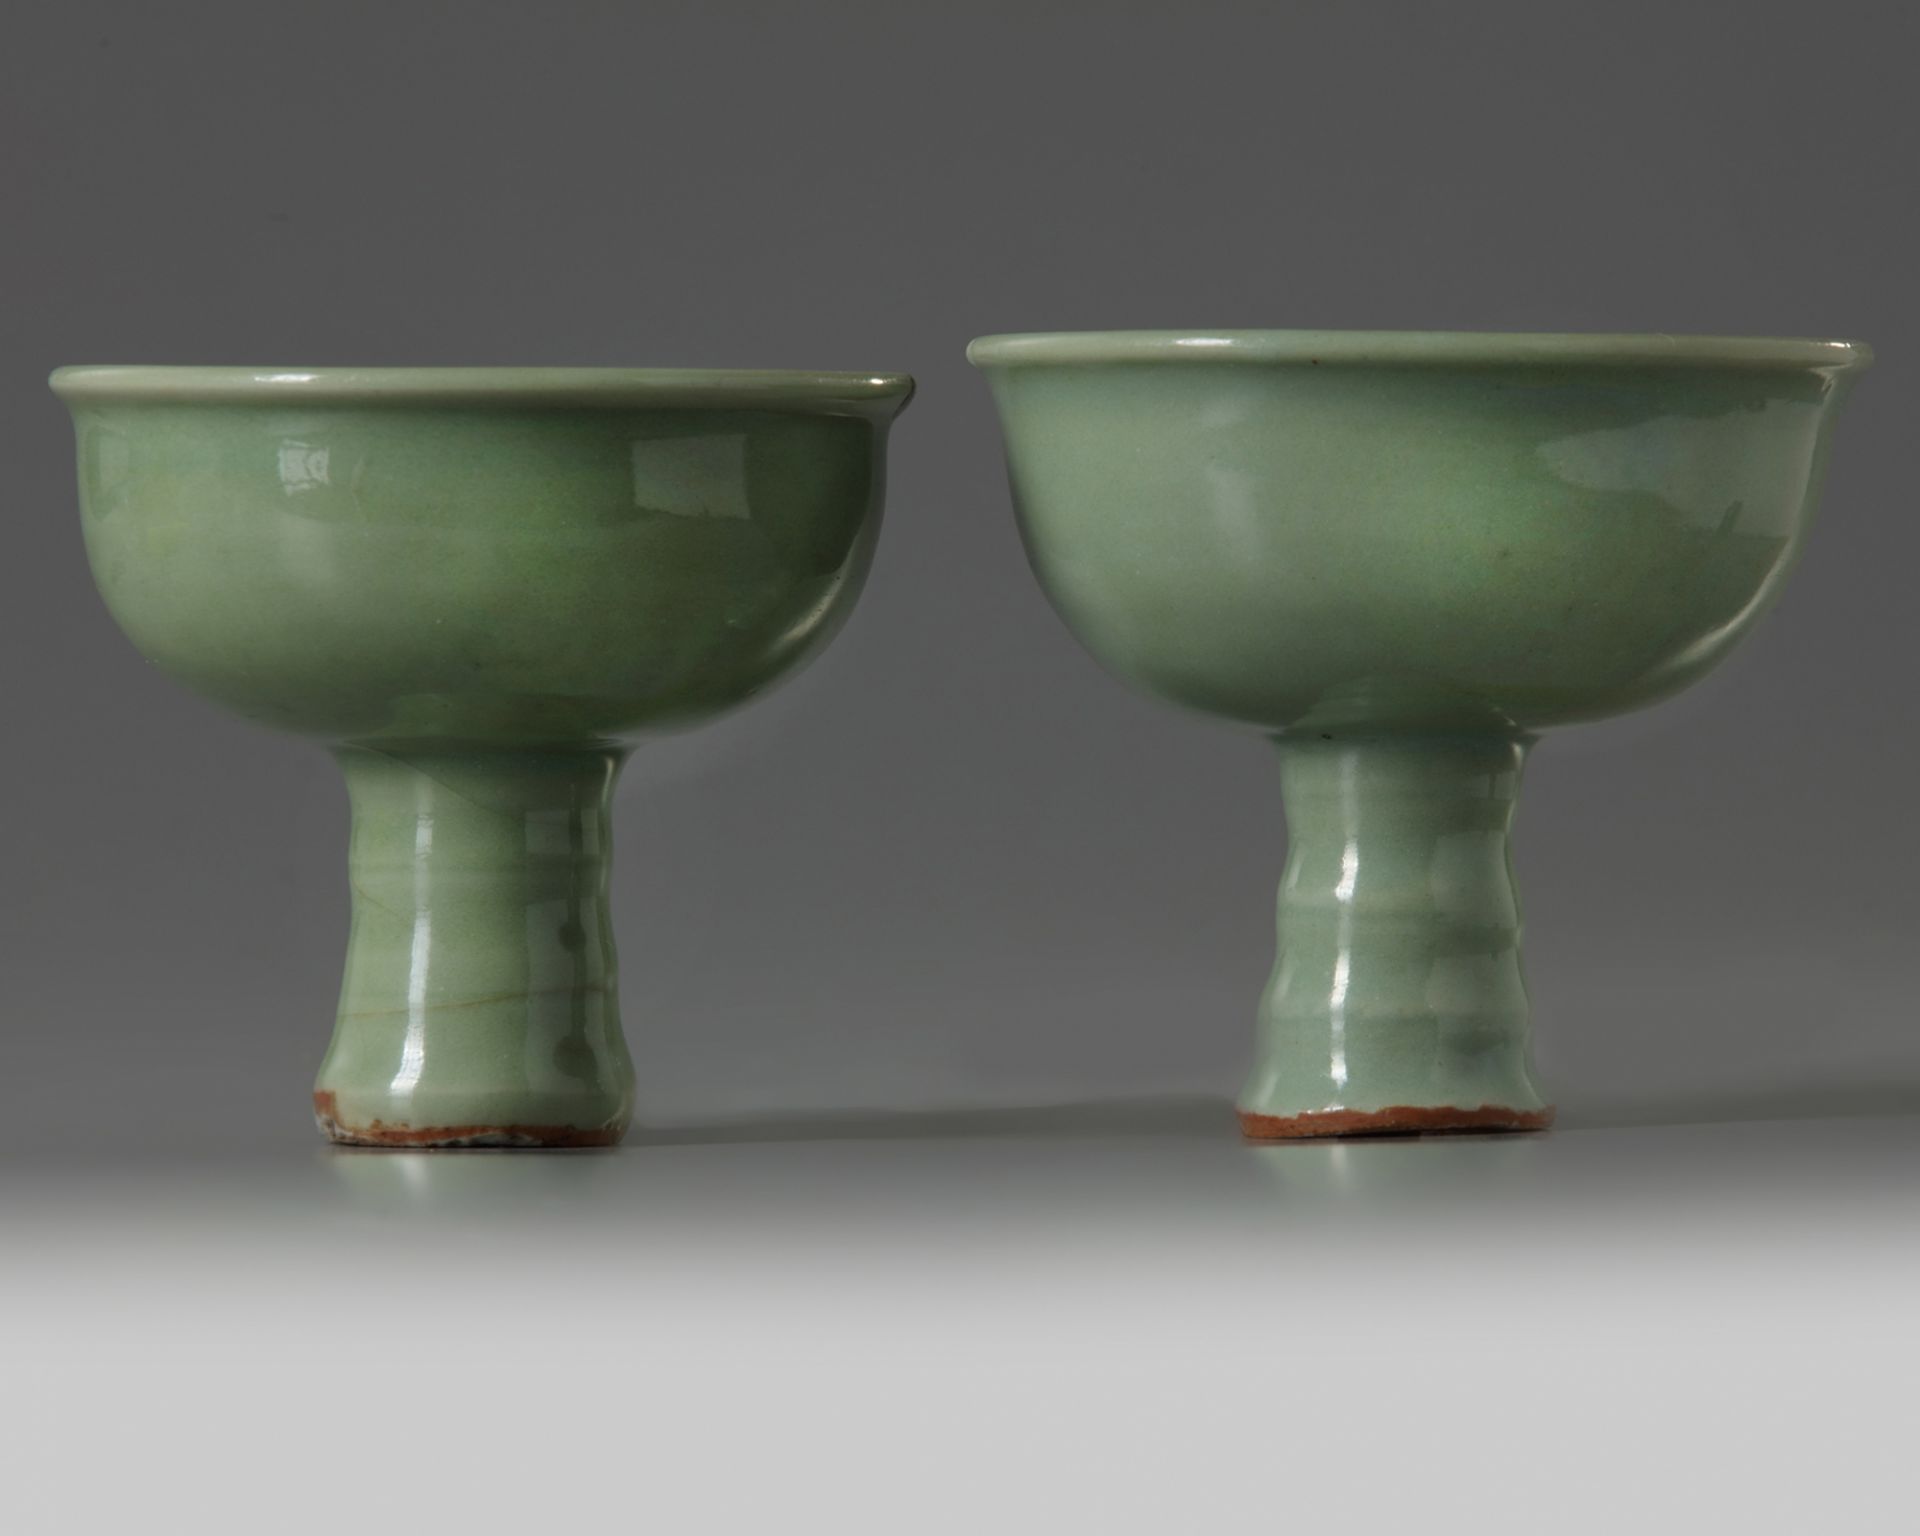 A SIMILAR PAIR OF CHINESE CELADON GLAZED STEMCUPS, LATE YUAN, EARLY MING DYNASTY, 14TH CENTURY - Image 2 of 5